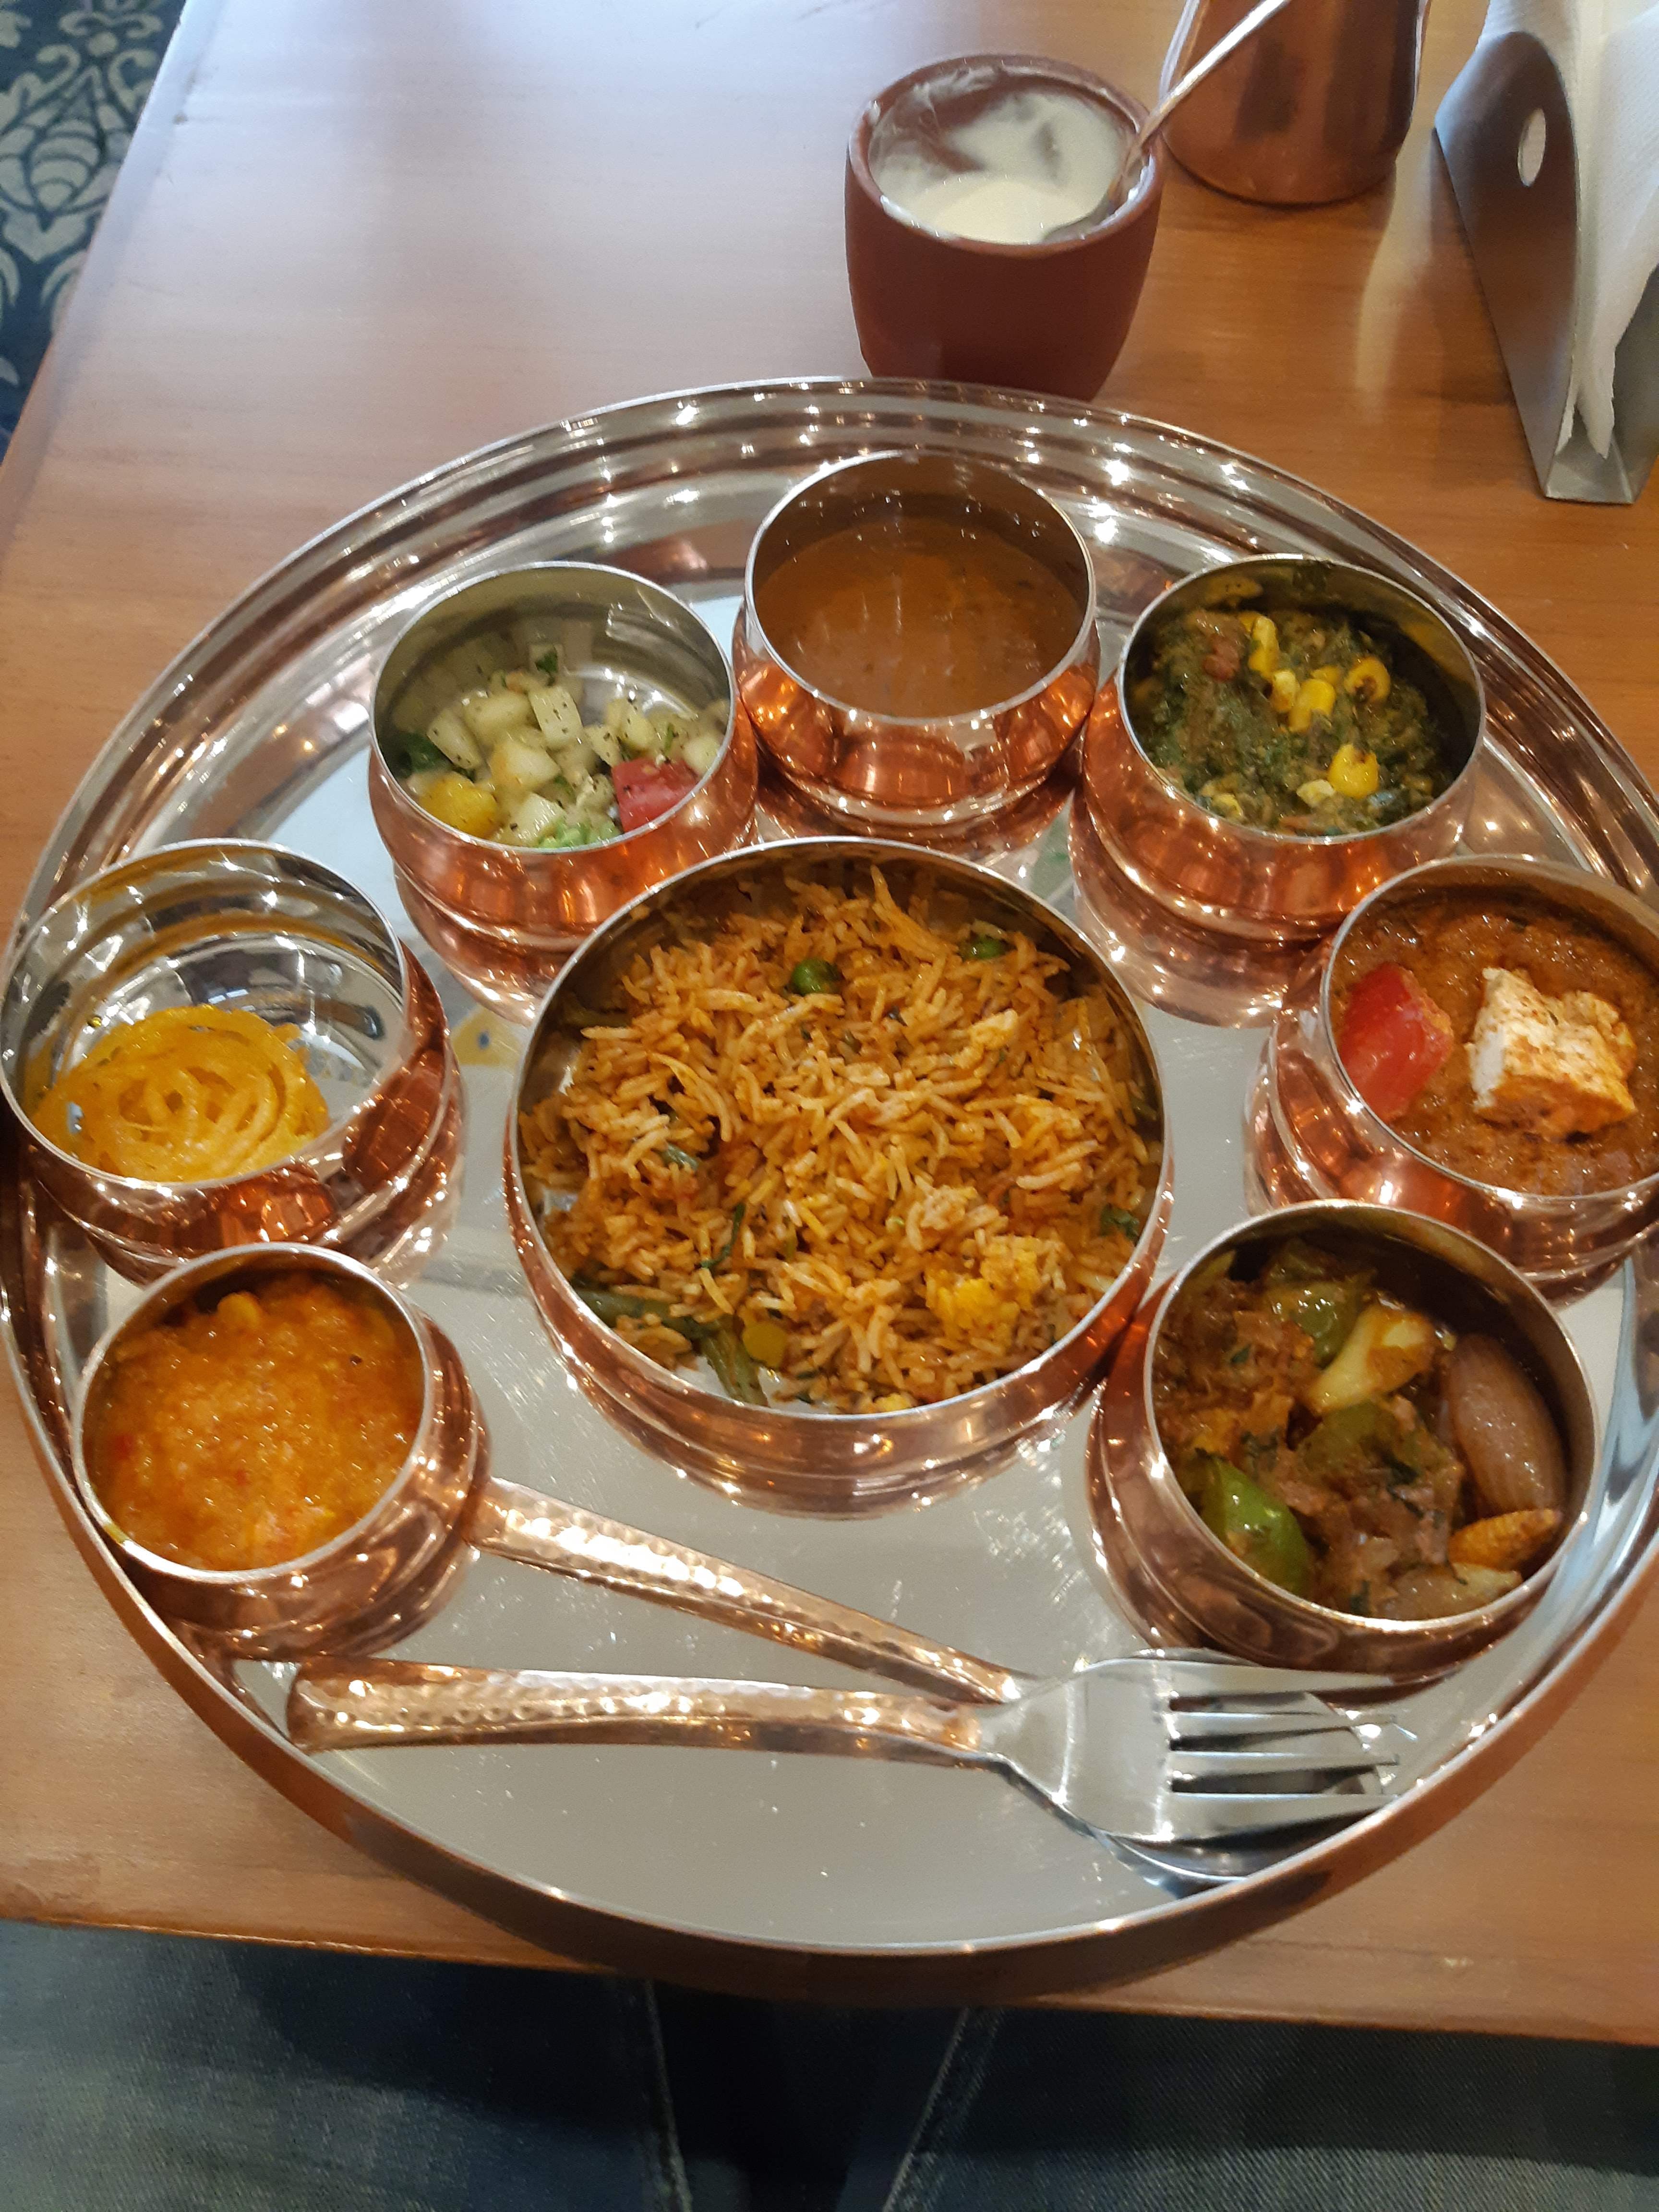 Dish,Food,Cuisine,Meal,Ingredient,Curry,Produce,Indian cuisine,Brunch,Lunch